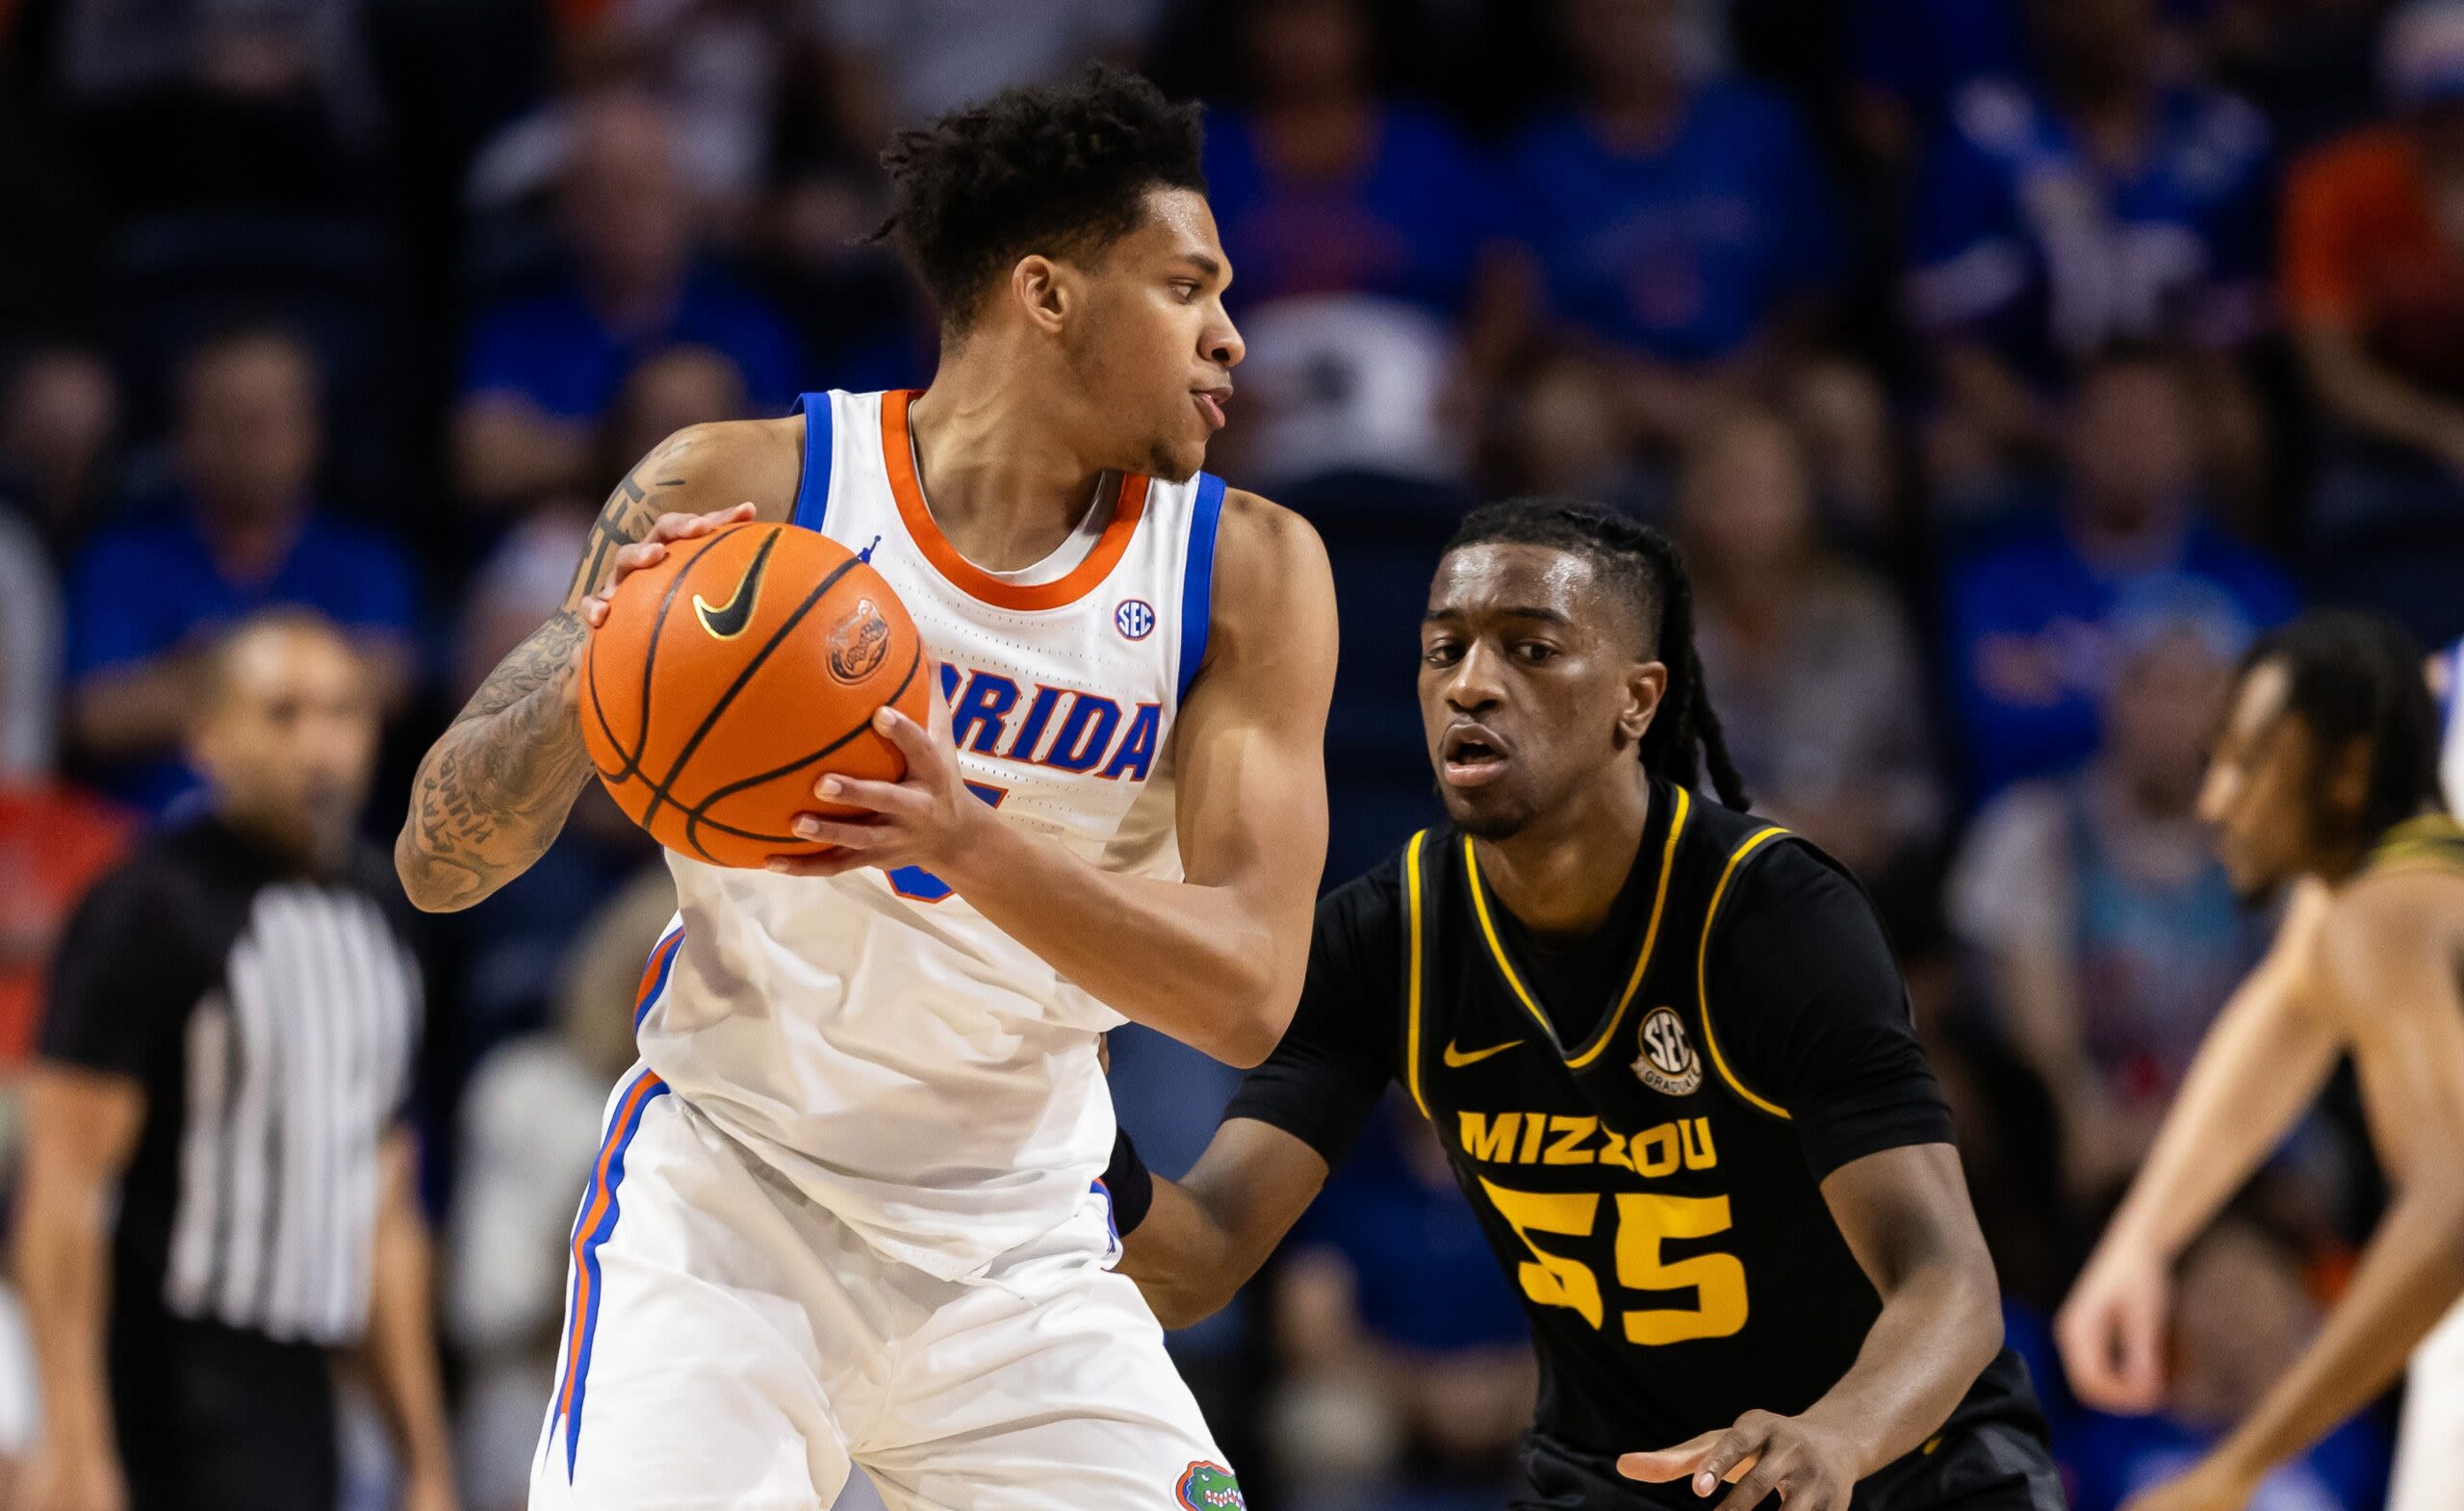 Will Richard to withdraw from 2024 NBA draft, return to Florida for senior year